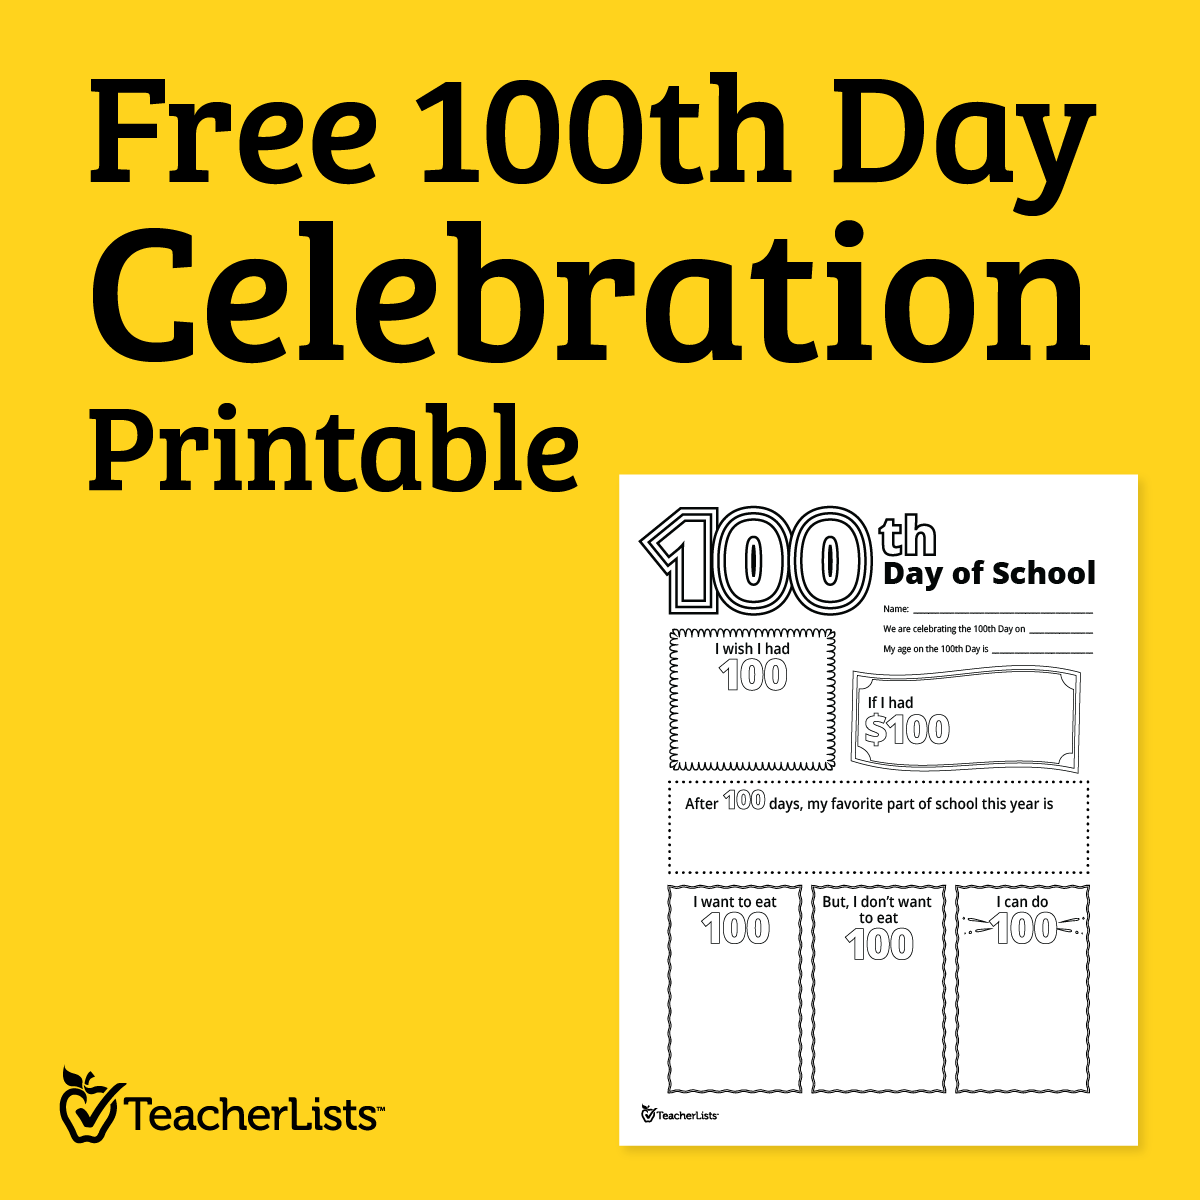 100th Day of School Free Printable